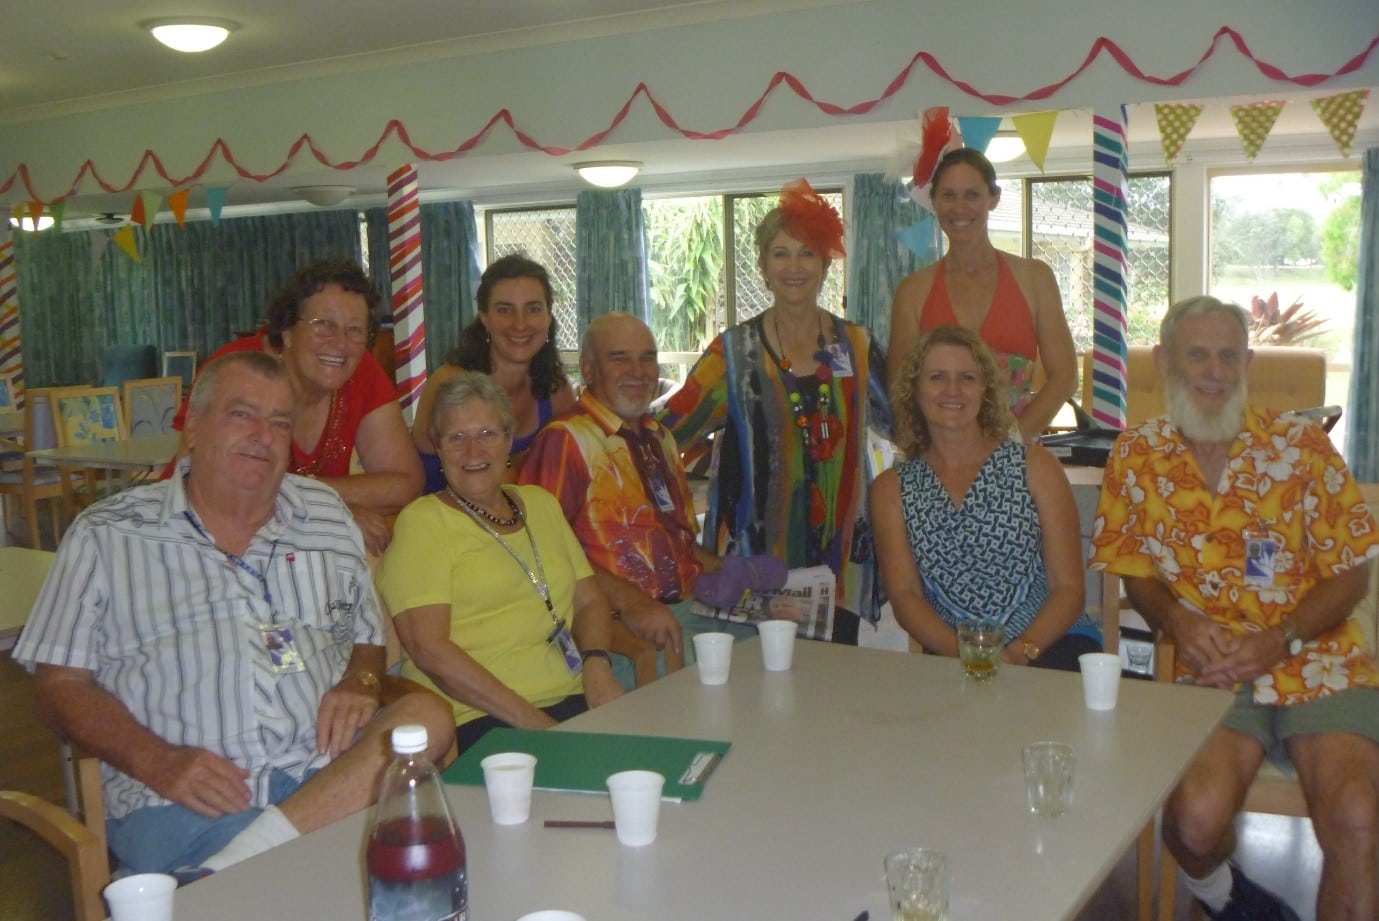 gathering in ding room at an aged care facility called Feros Care Wommin Bay.